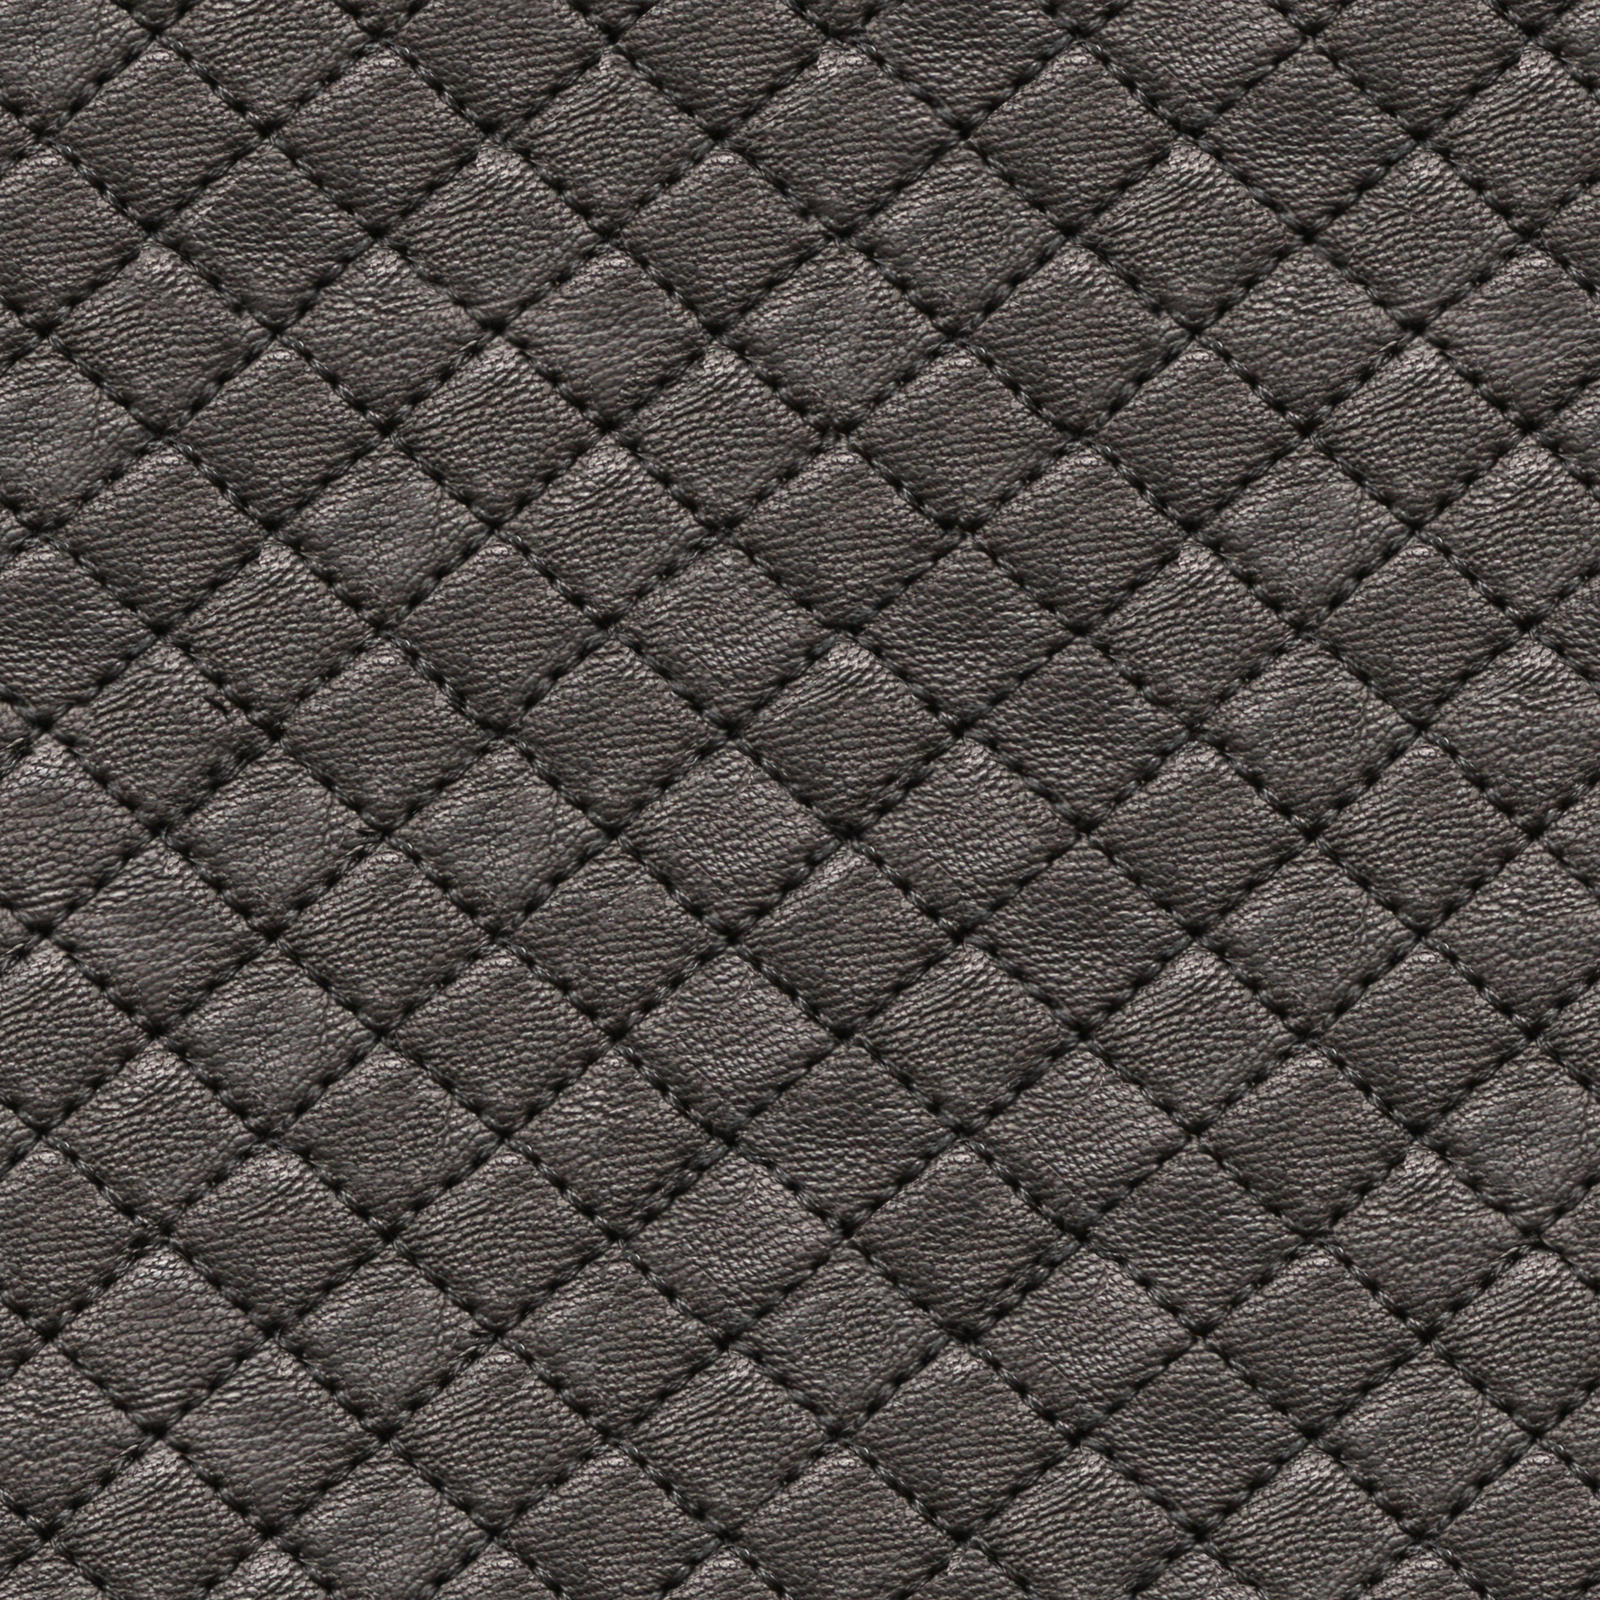 High Resolution Seamless Leather Texture by environment-textures on